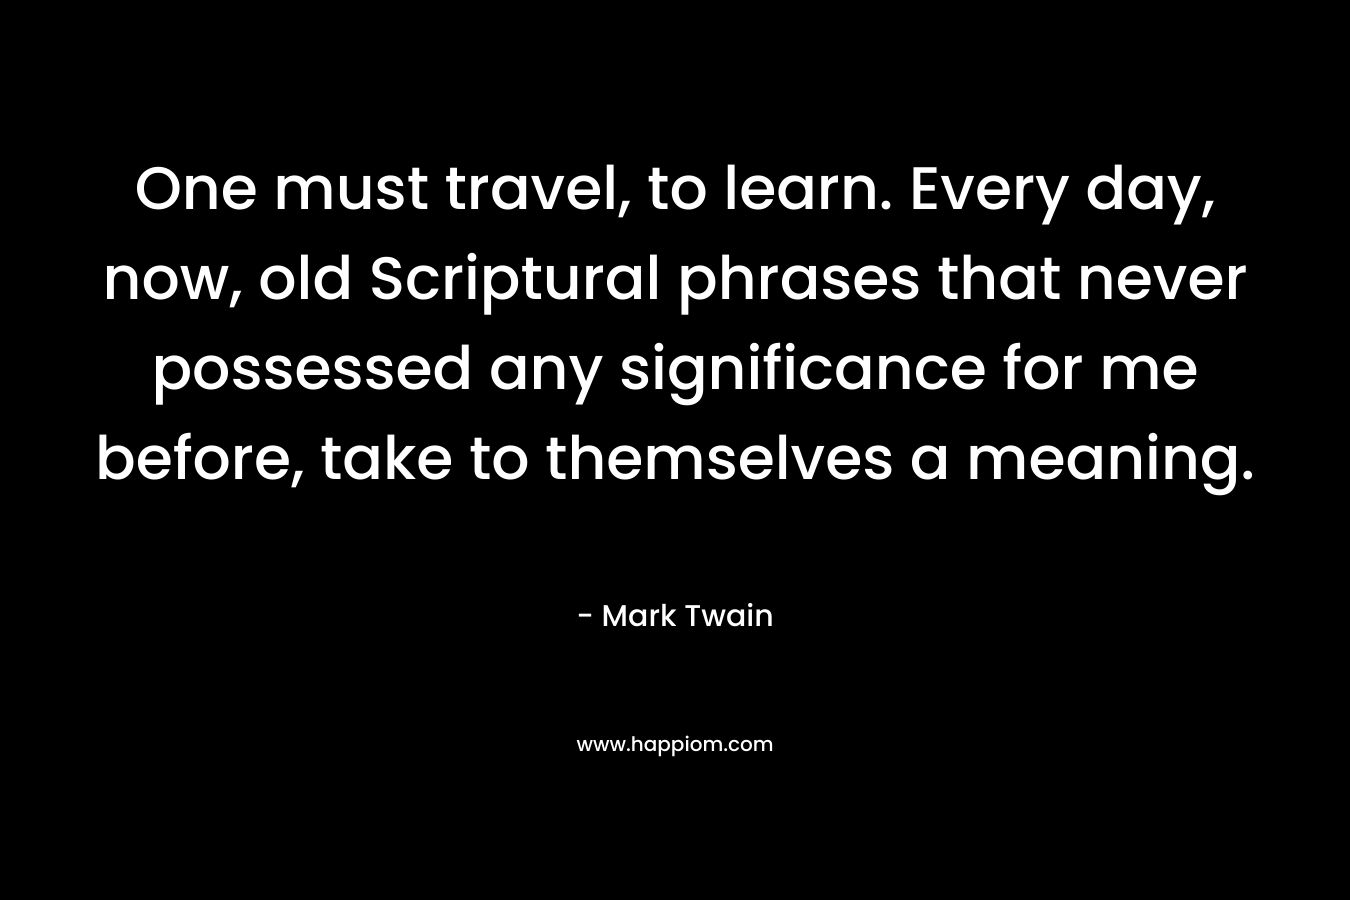 One must travel, to learn. Every day, now, old Scriptural phrases that never possessed any significance for me before, take to themselves a meaning. – Mark Twain